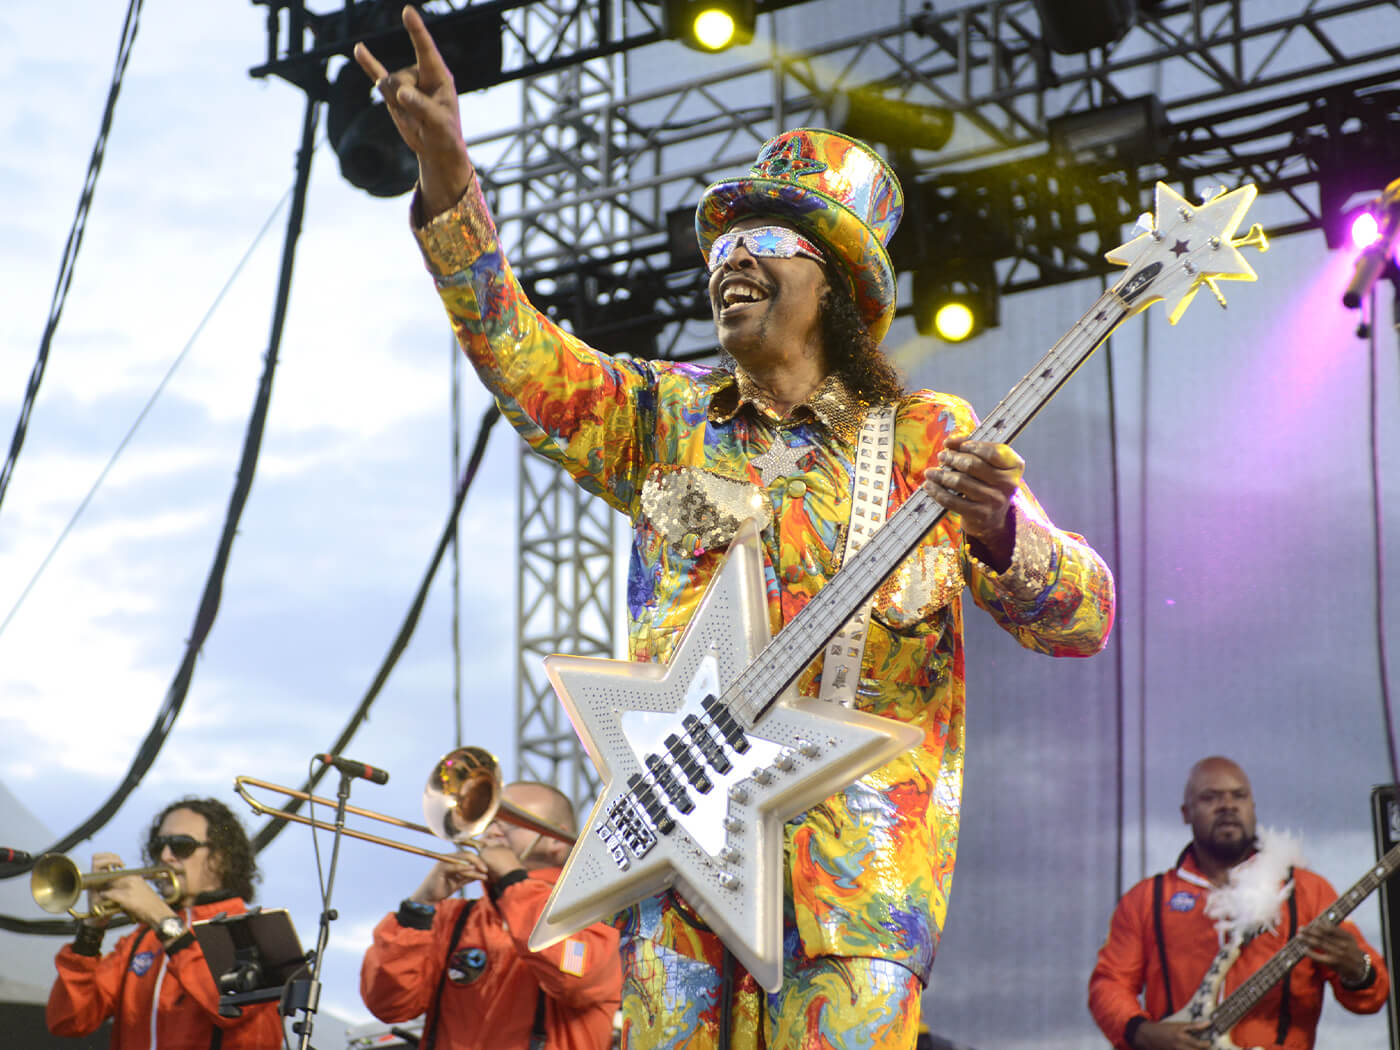 bootsy-collins-onstage-TimMosenfelder-GettyImages@1400x1050.jpg